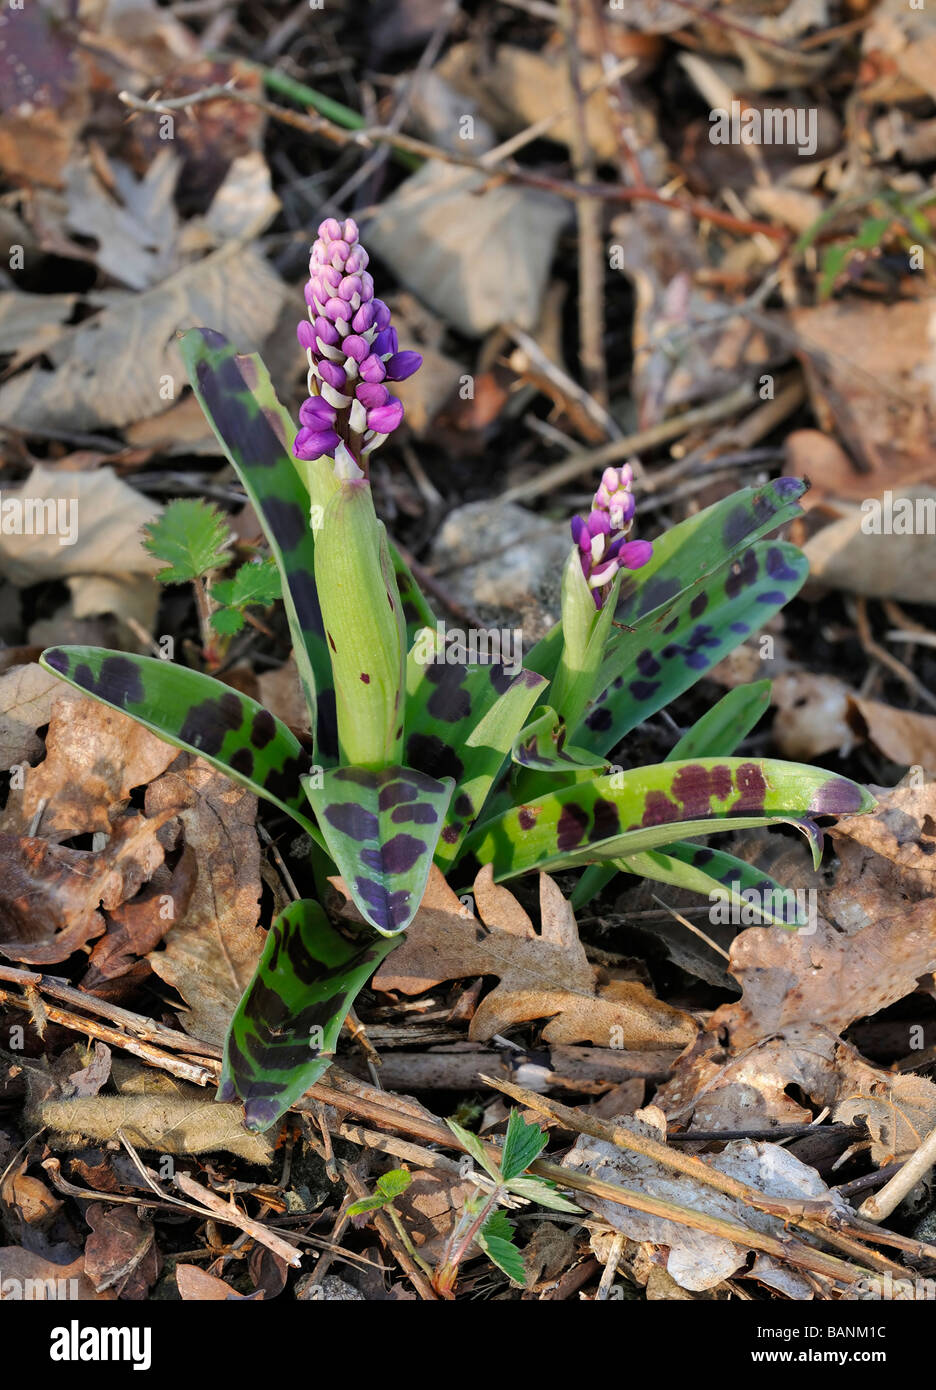 Early Purple Orchids Orchis mascula In leaf litter showing heavily spotted leaves Stock Photo